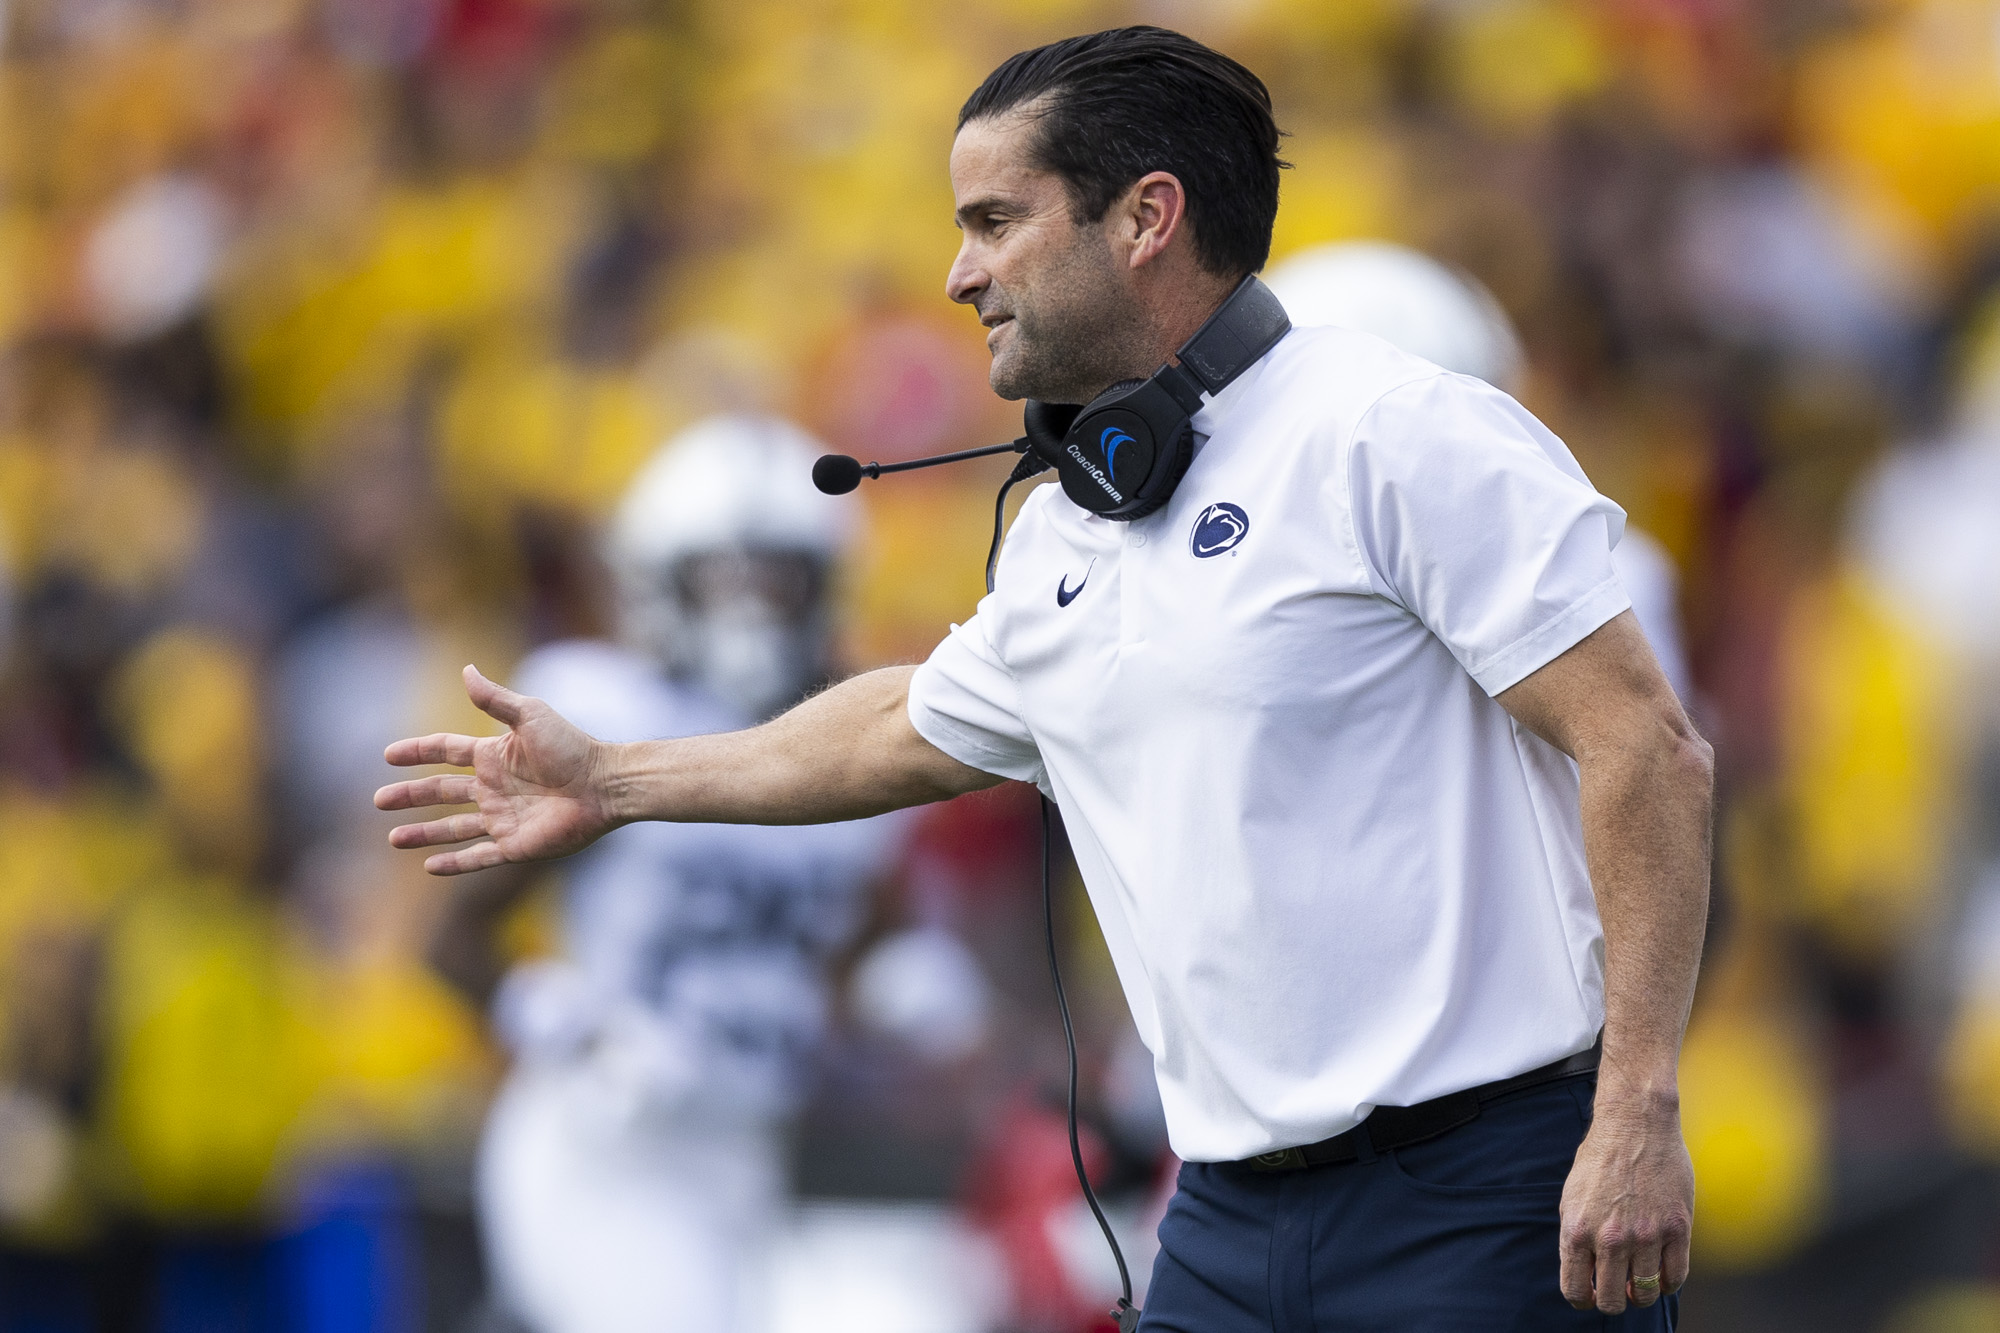 Penn State’s bowl projections get Peachy; can Franklin hold on to Manny Diaz?, and more